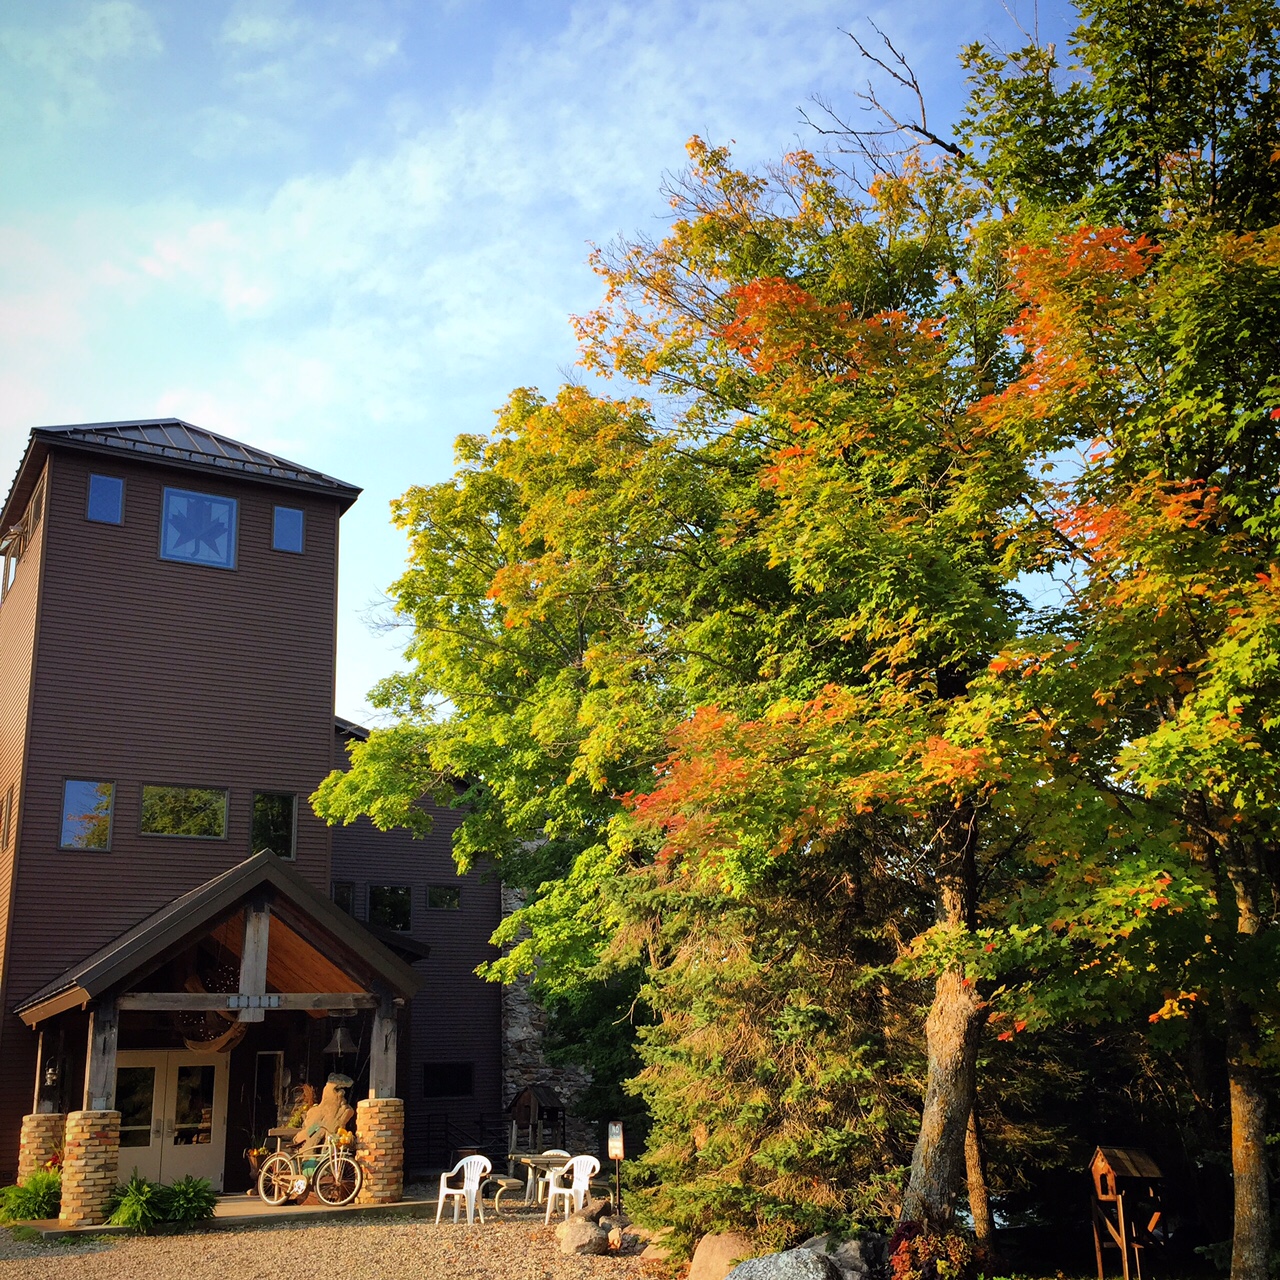 Early fall color in front of the main lodge. September 15th, 2015.